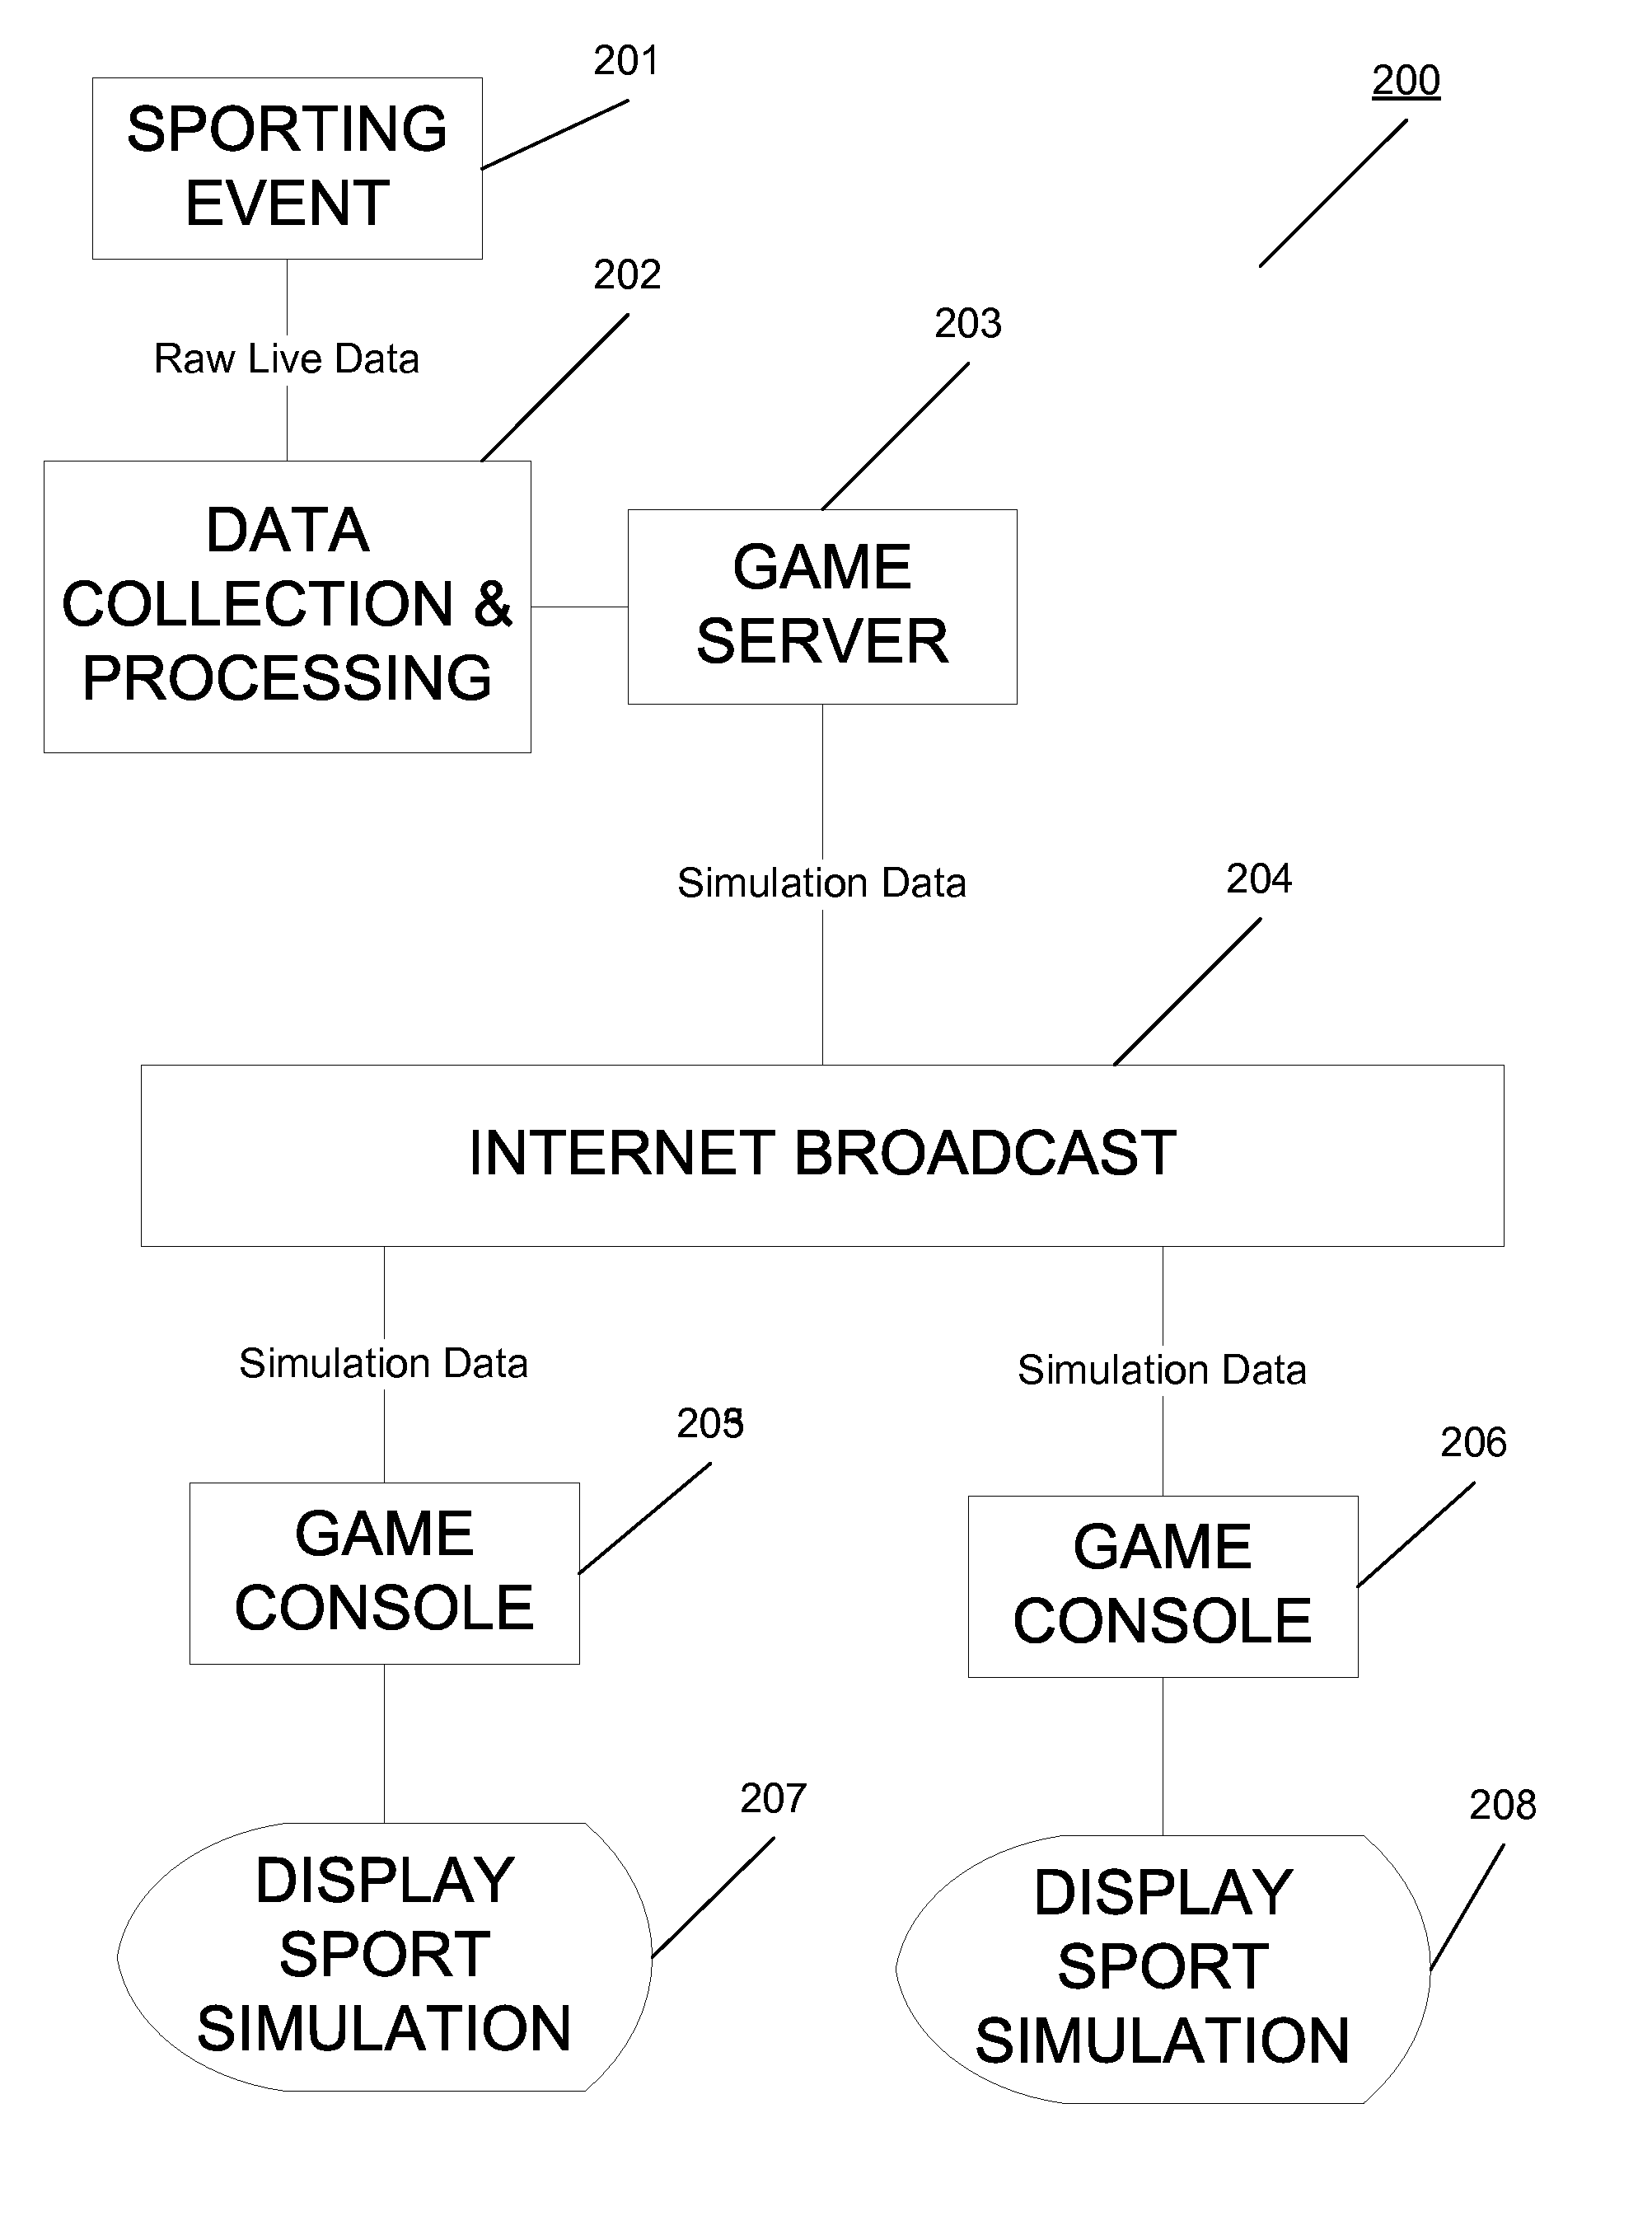 Electronic simulation of events via computer-based gaming technologies